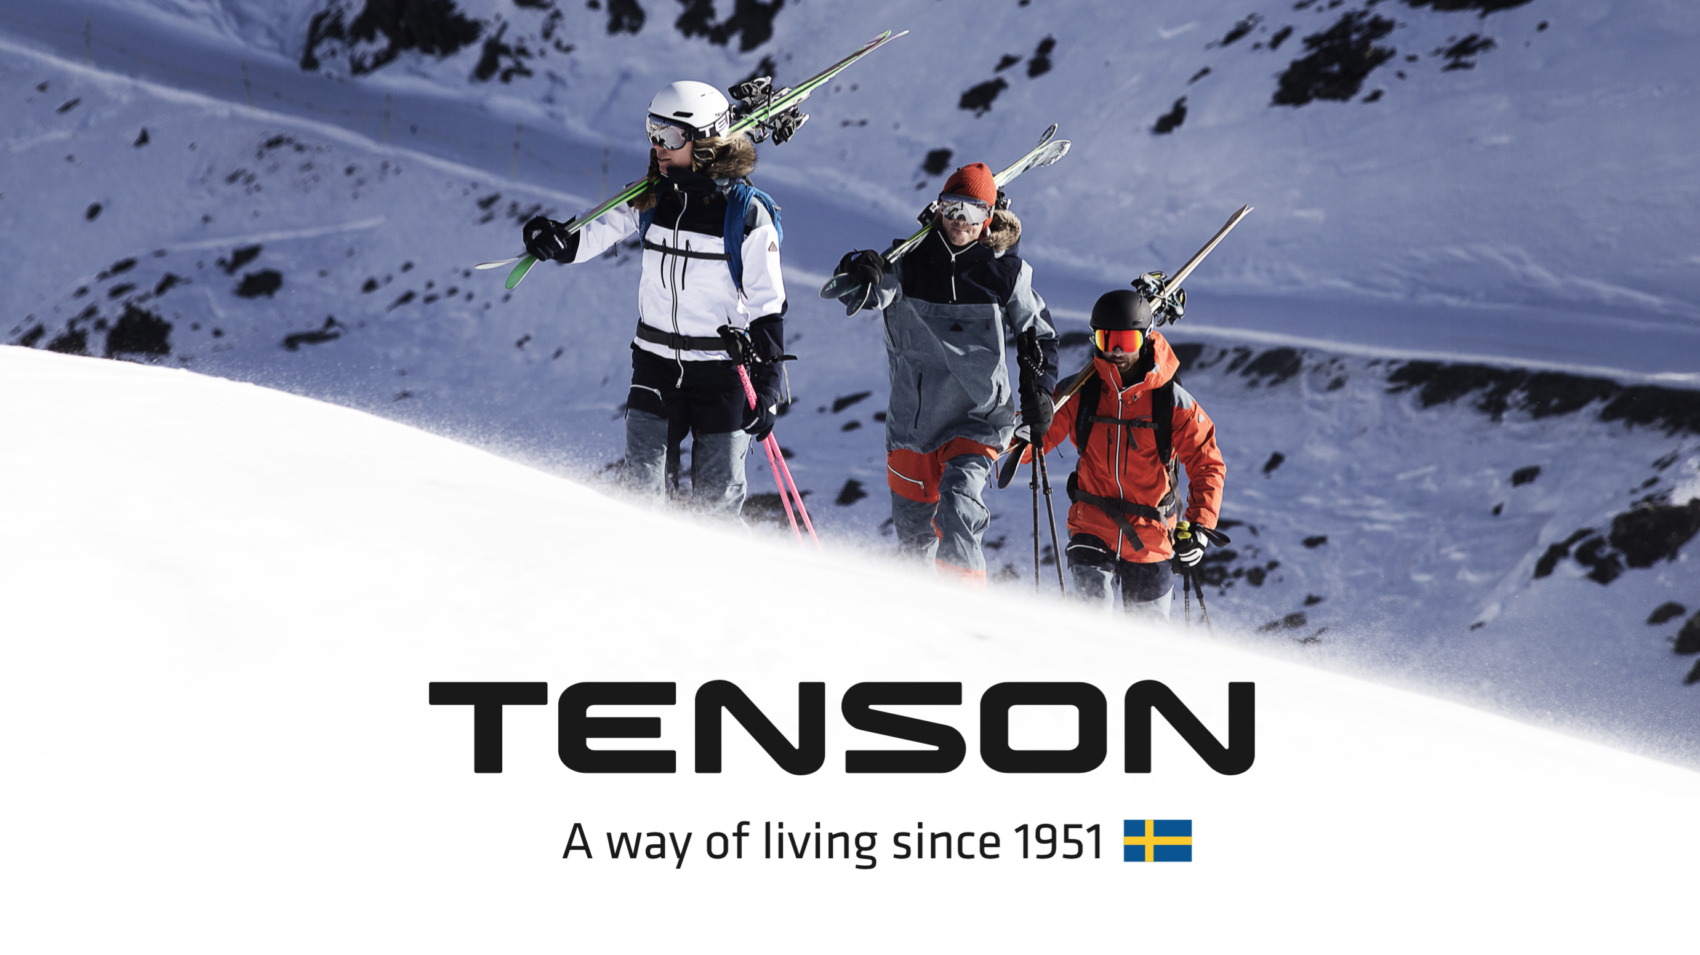 overzien Spanning amplitude Getting Paid to Test Free Ski Gear? A Dream Job with a Twist from Tenson -  SnowBrains